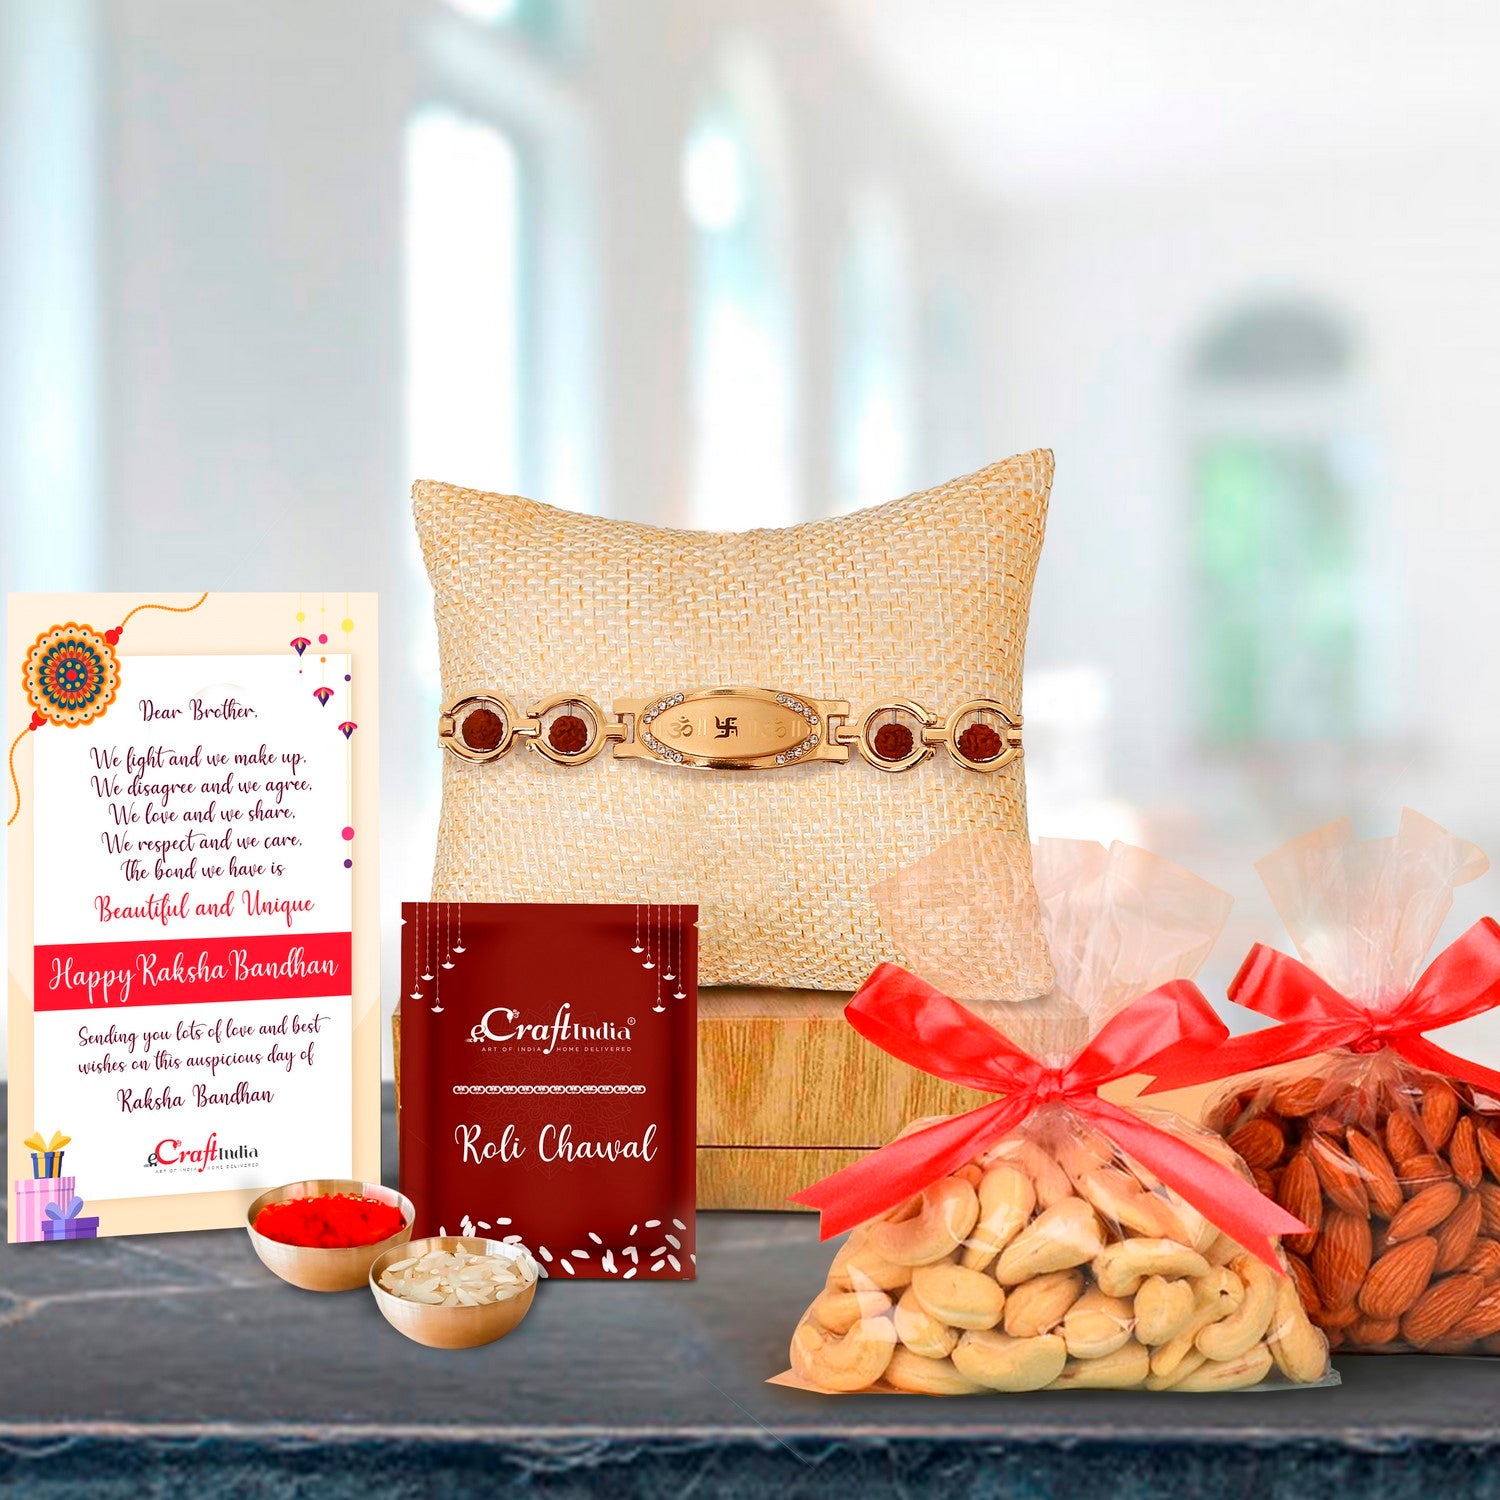 Designer Bracelet Religious Rakhi with Badam and Cashew (200 gm each, total 400 gm) and Roli Chawal Pack, Best Wishes Greeting Card